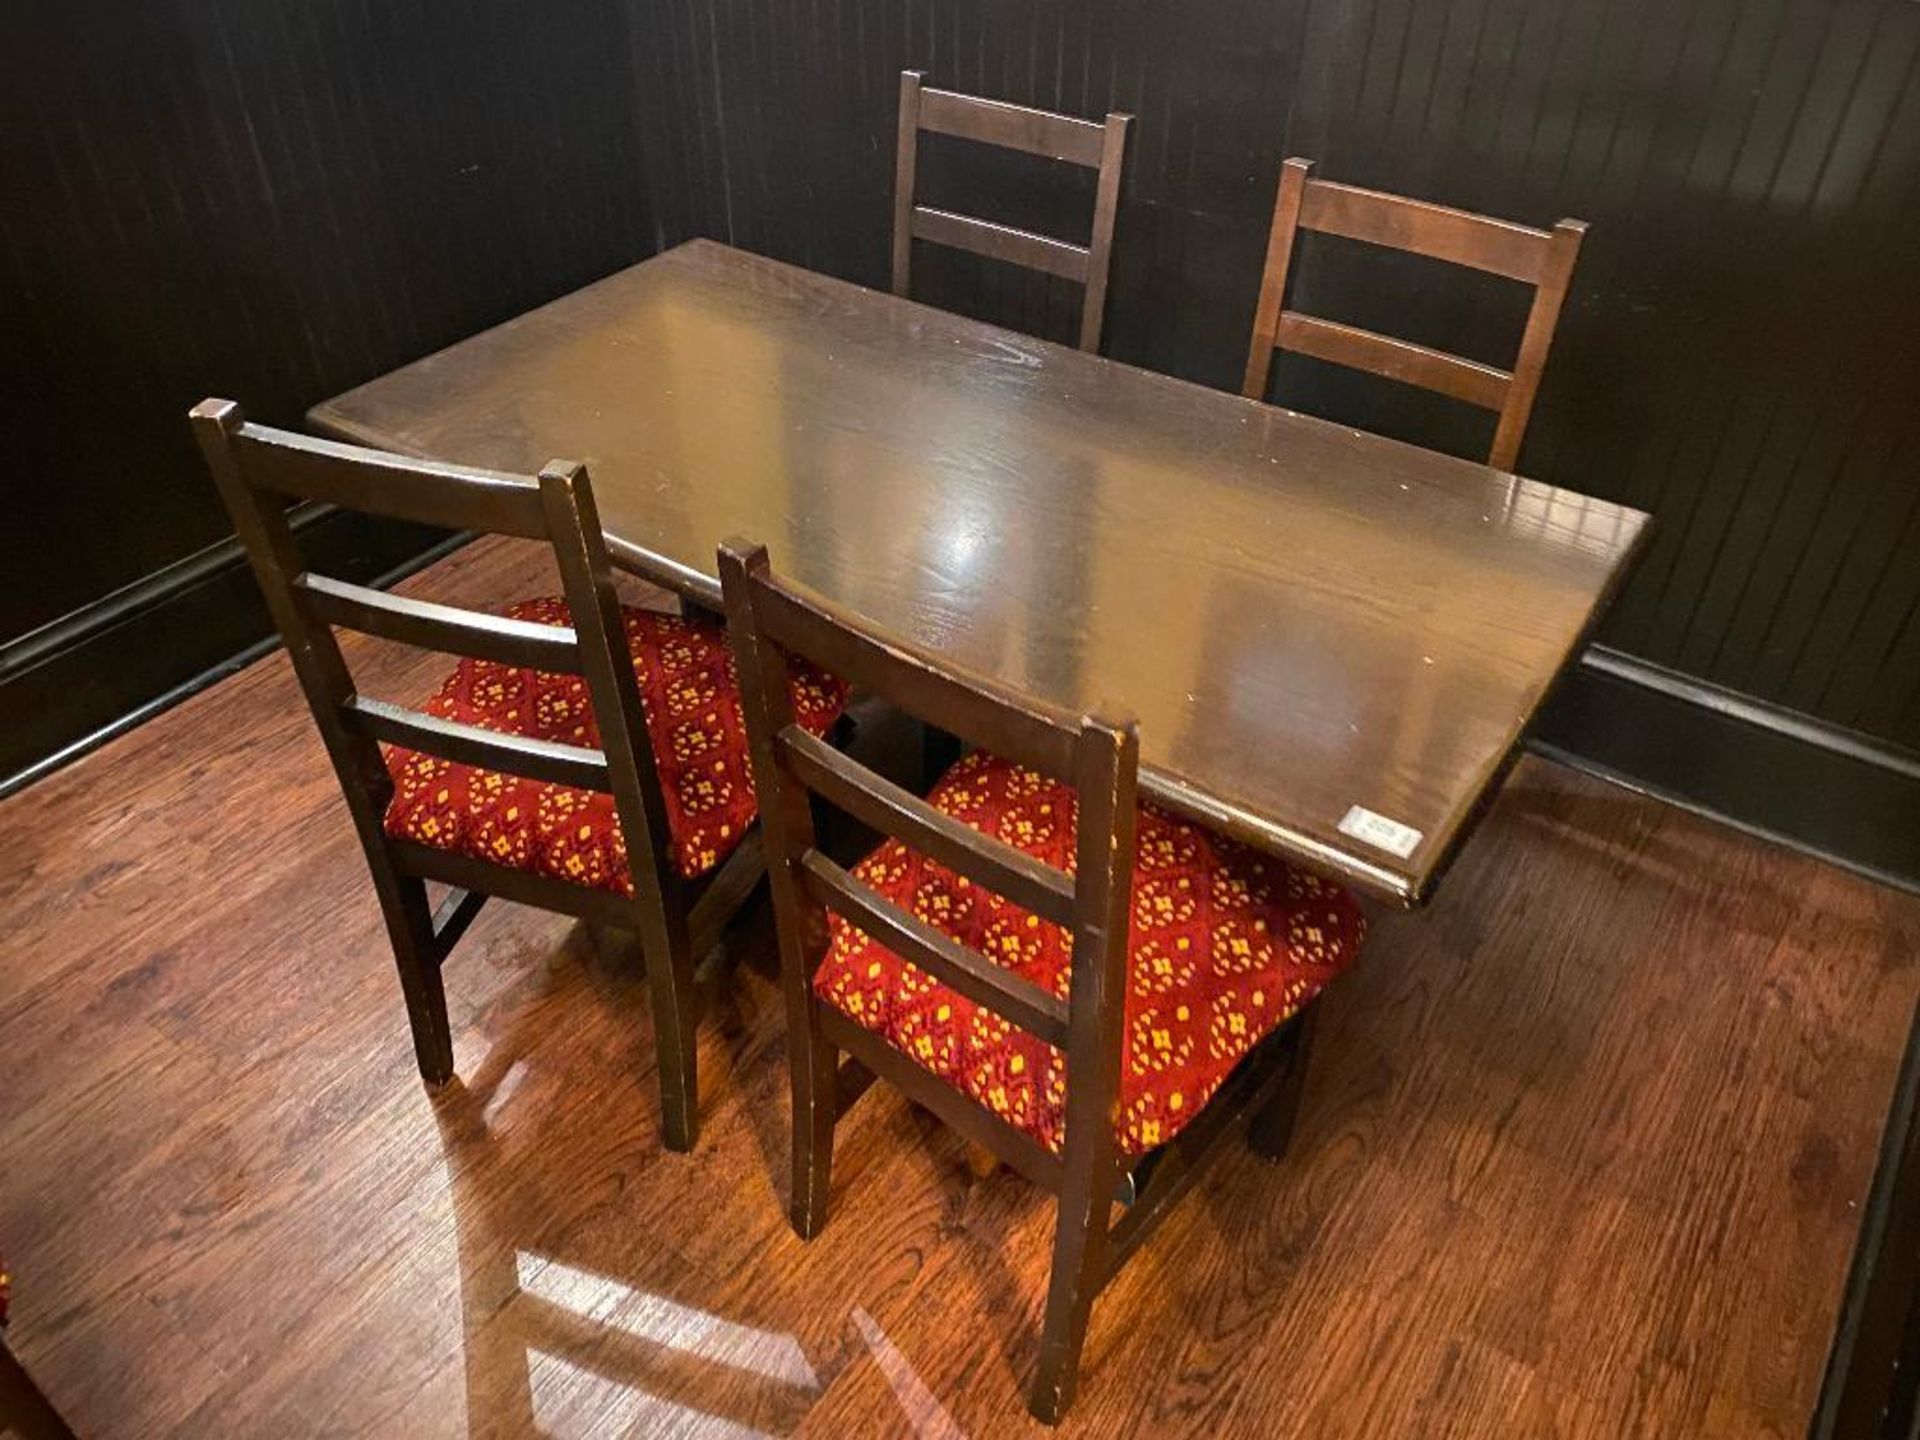 RECTANGULAR TABLE WITH 4 CHAIRS - 55.5" X 27.5" X 30"